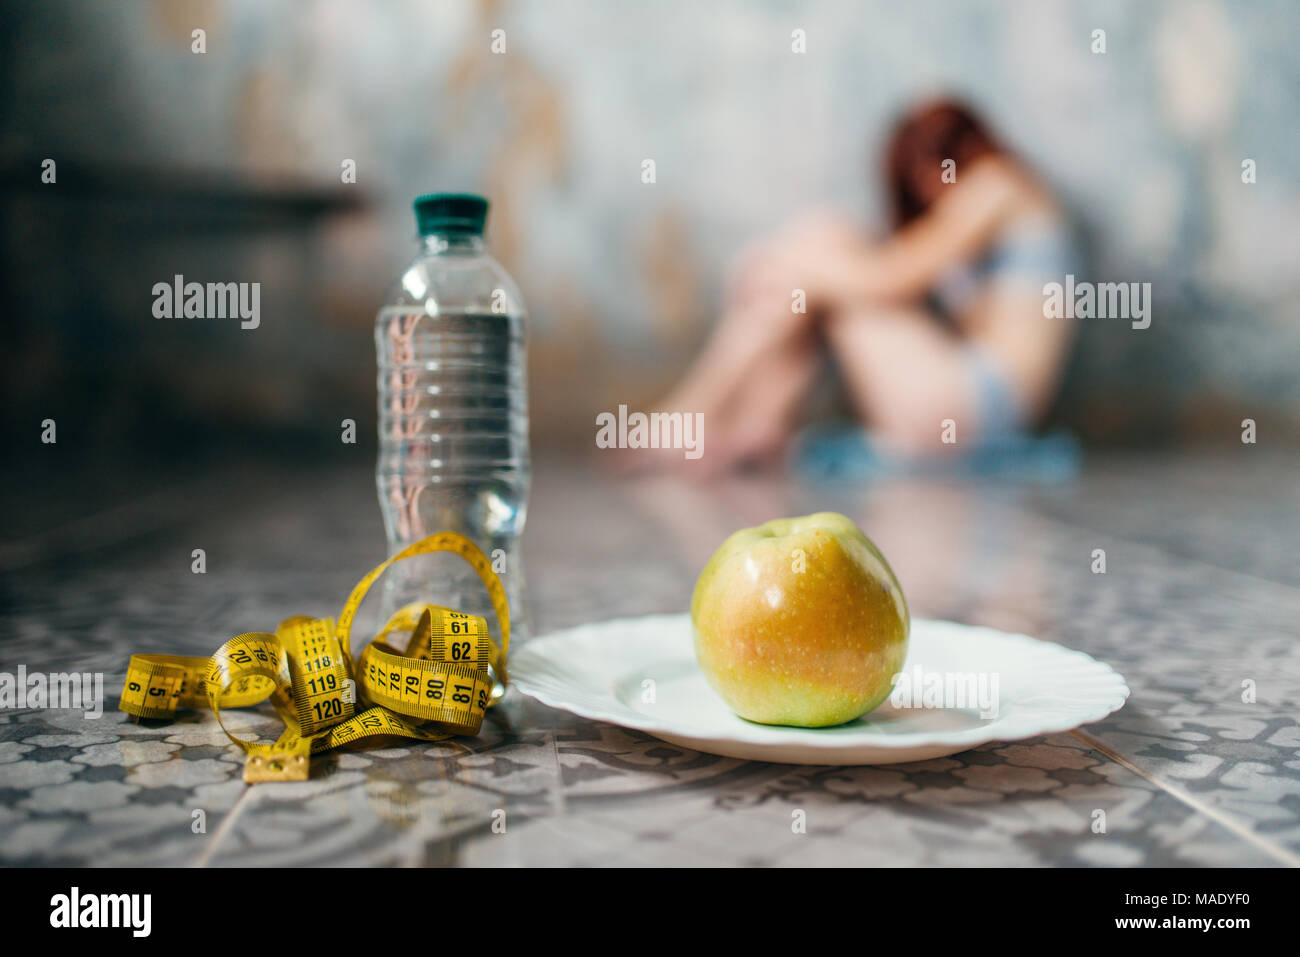 Water, apple and measuring tape, anorexic woman Stock Photo